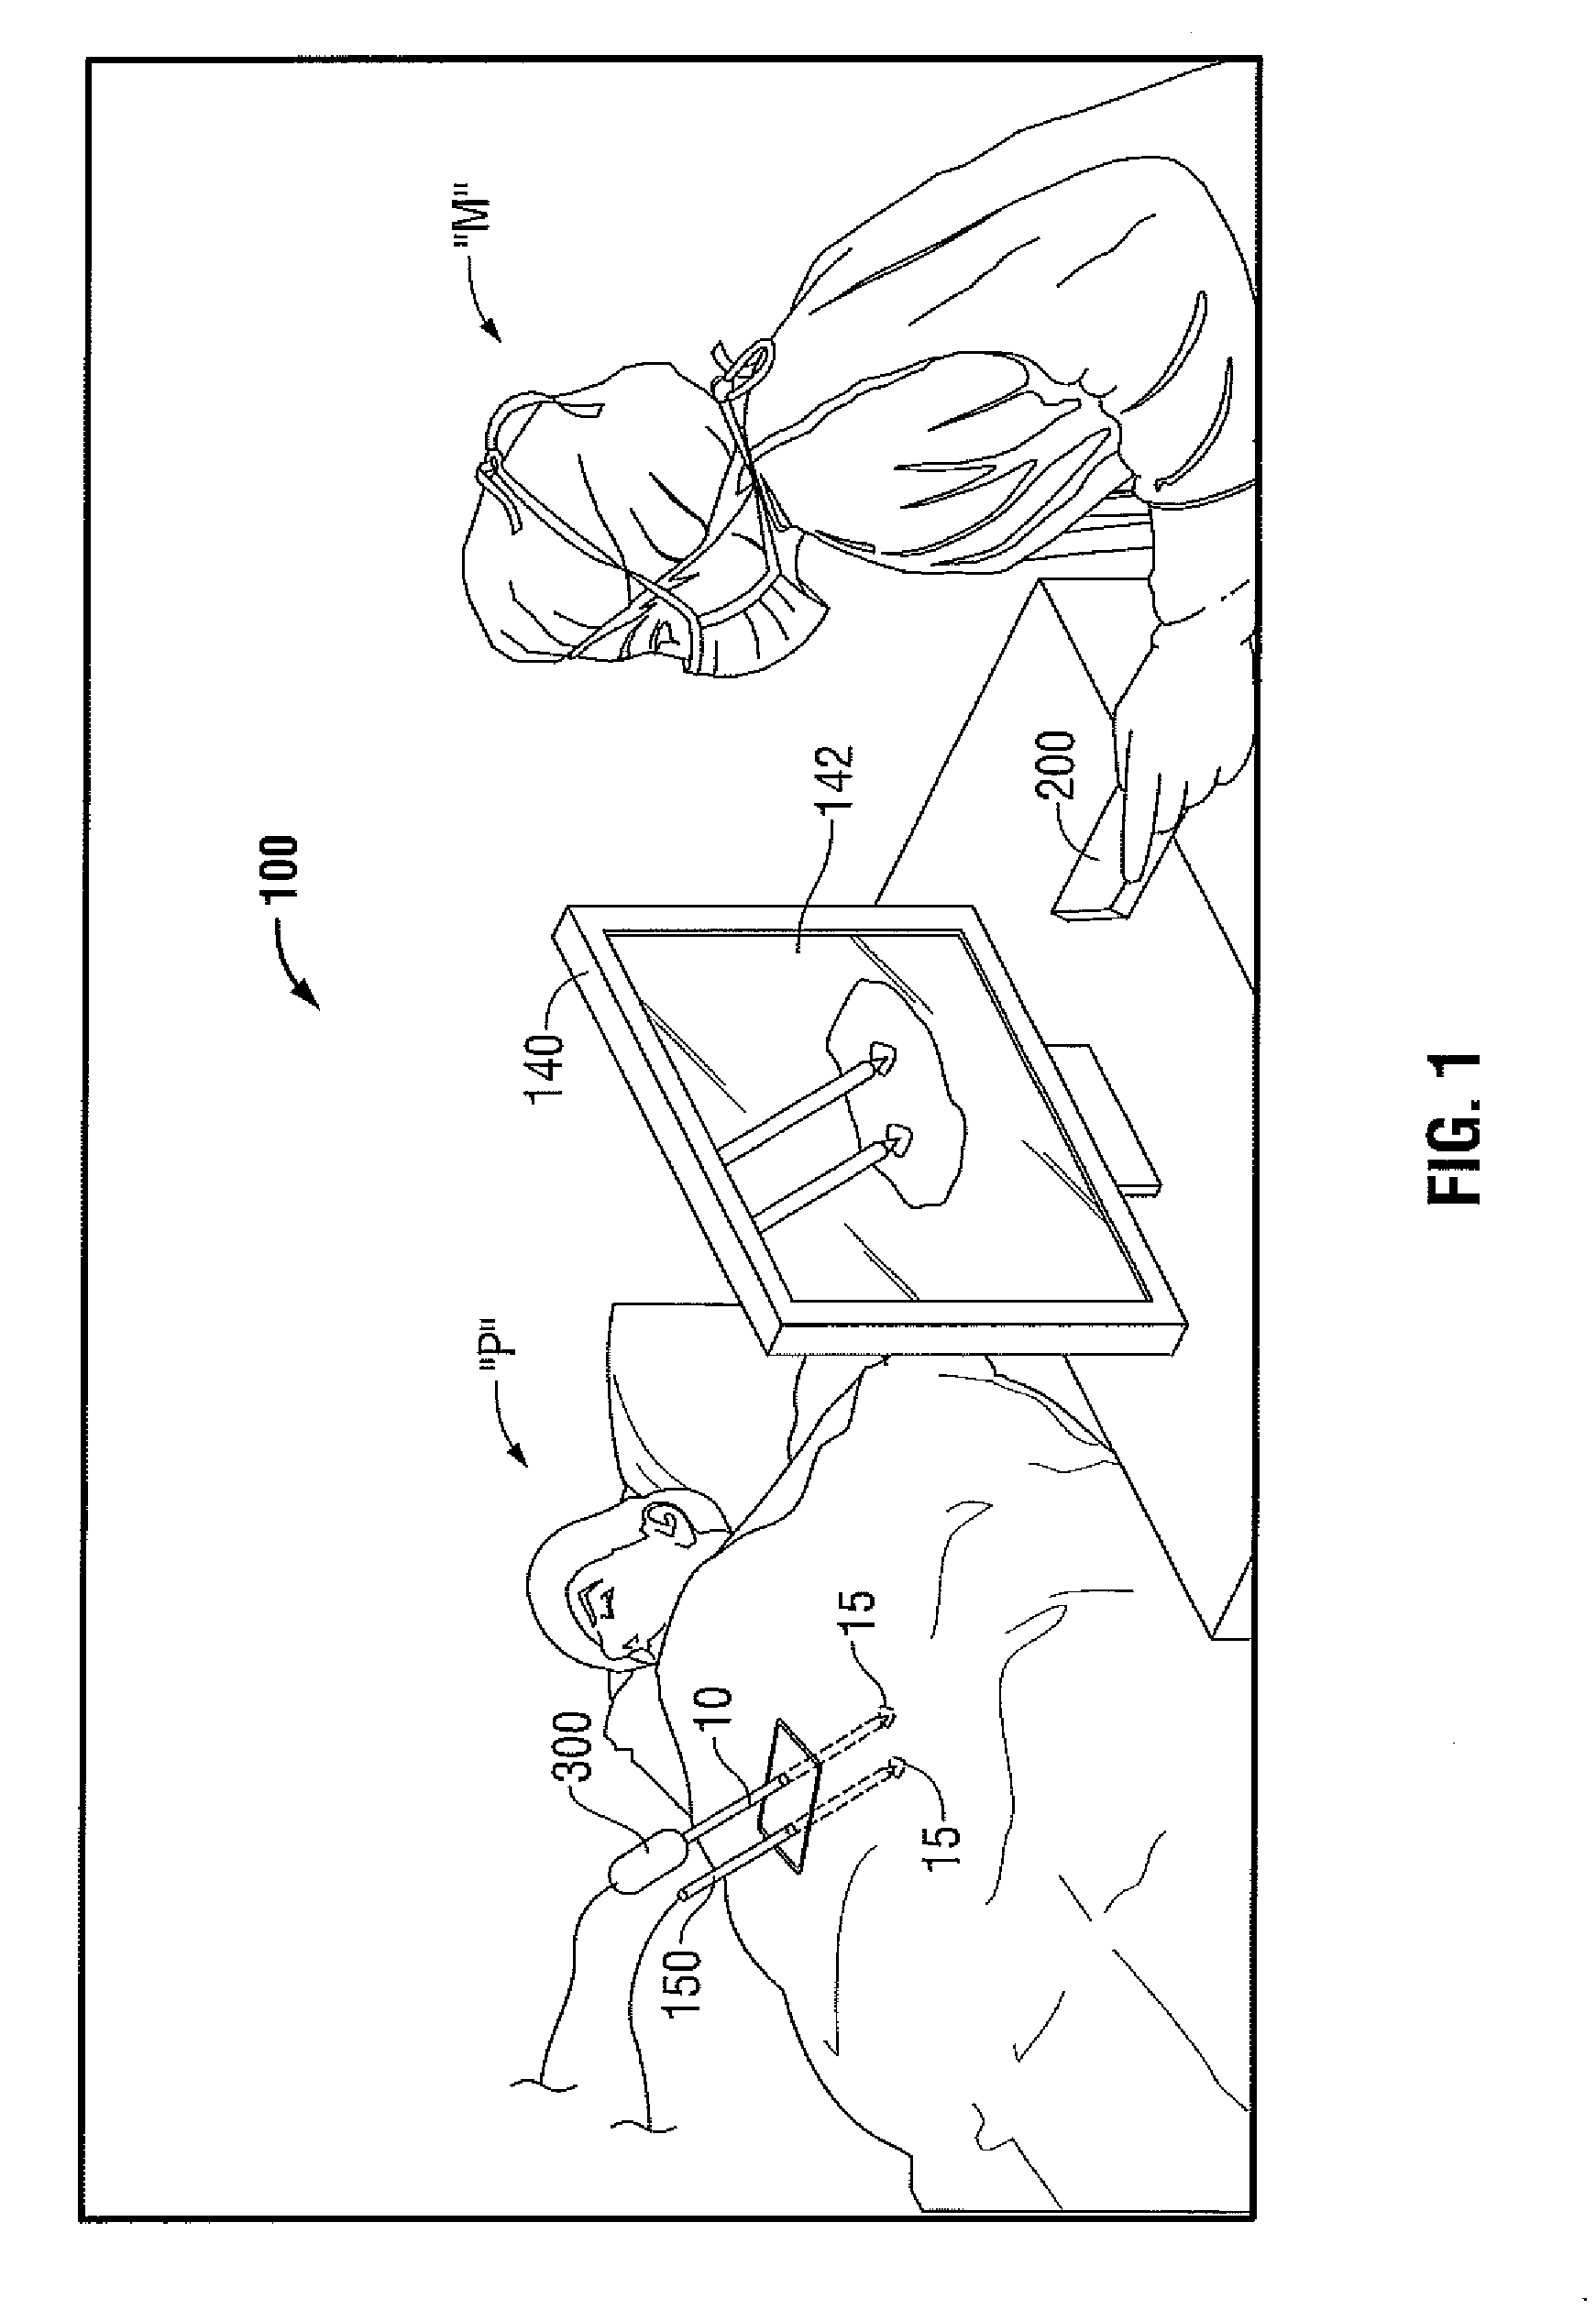 Apparatus and Method for Using a Remote Control System in Surgical Procedures